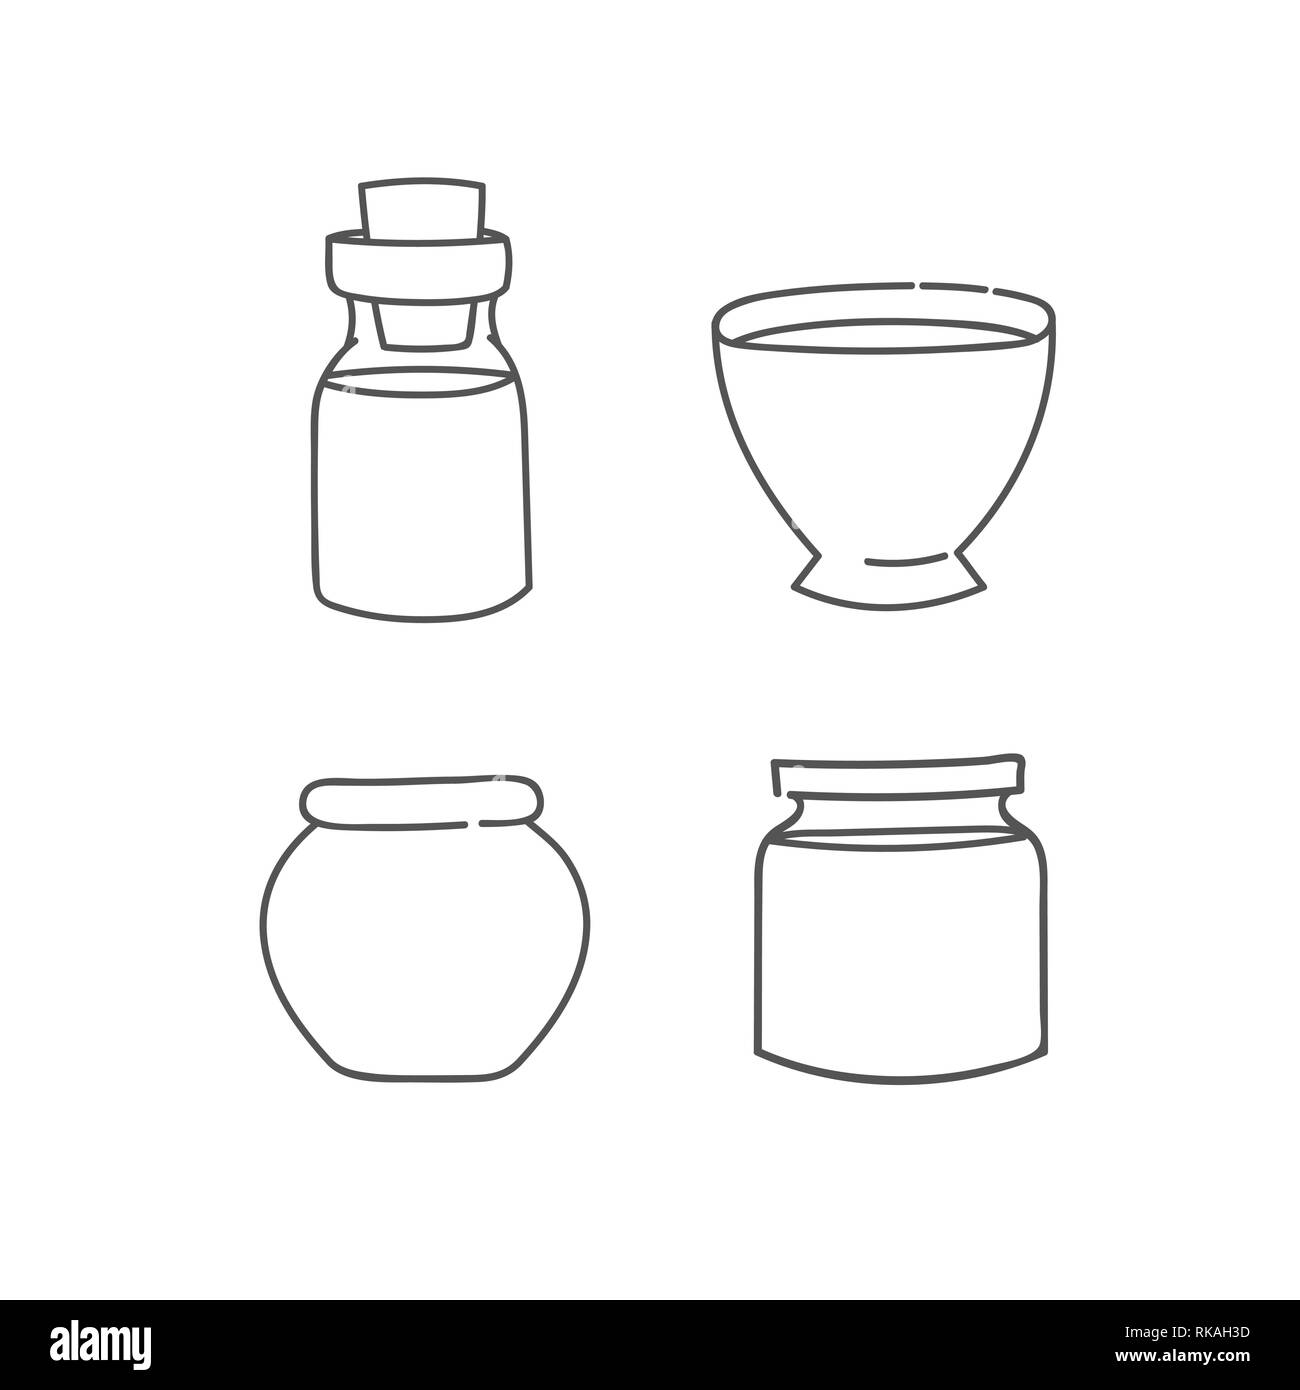 Glass bottle jar bowl and pot set of doodles outline linear icons collection of vintage containers for ingredients and food vector illustration isolat Stock Vector